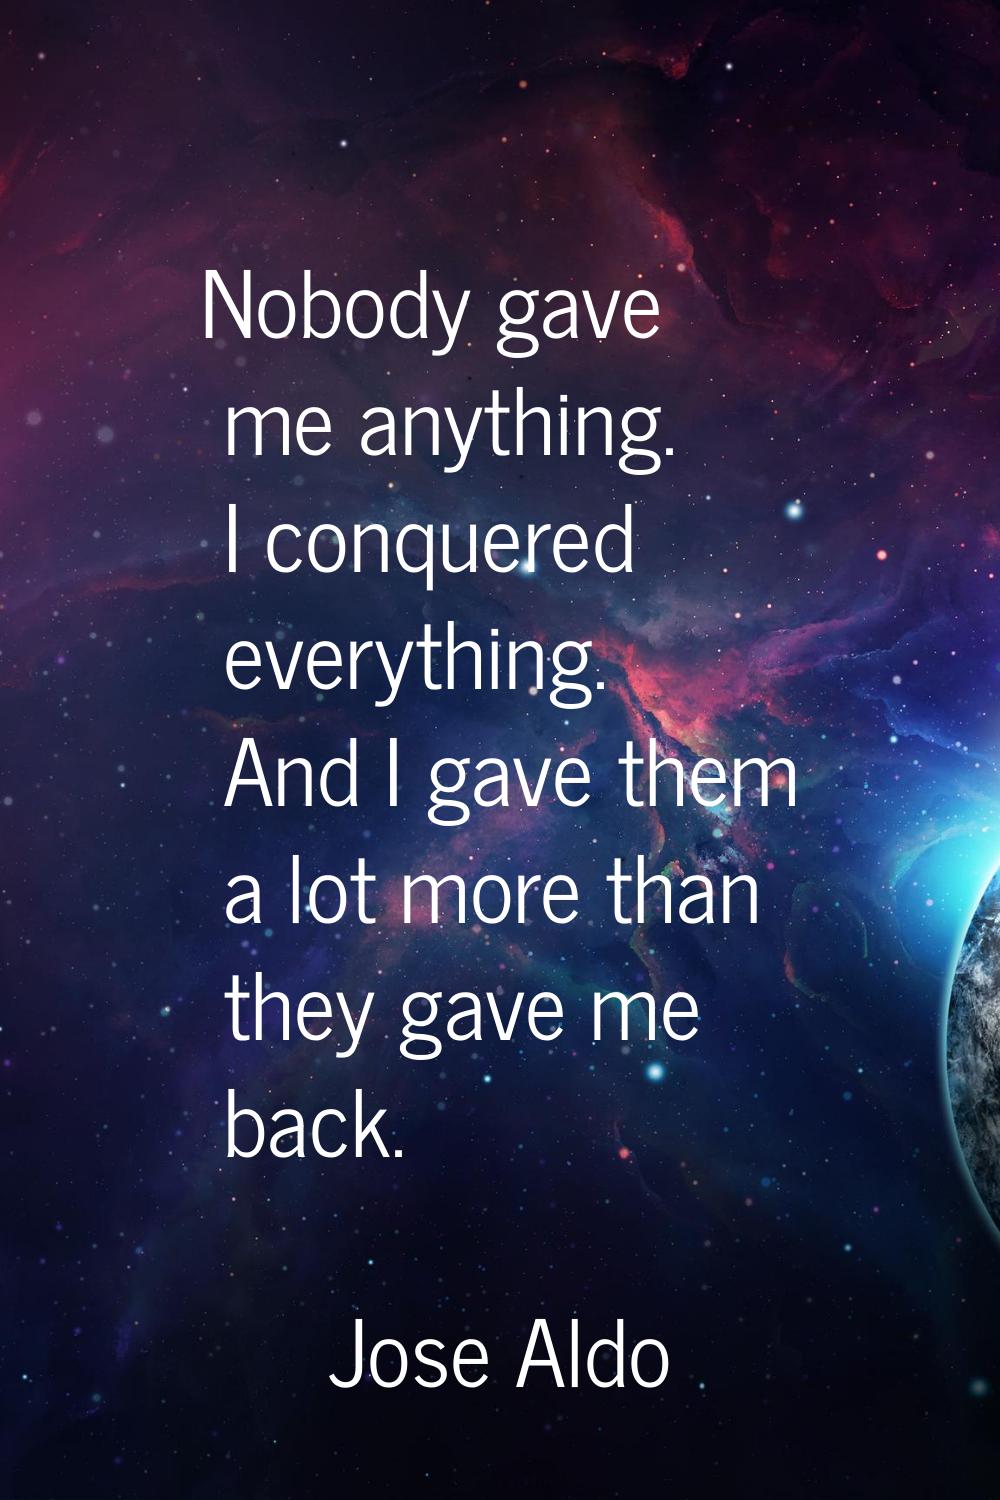 Nobody gave me anything. I conquered everything. And I gave them a lot more than they gave me back.